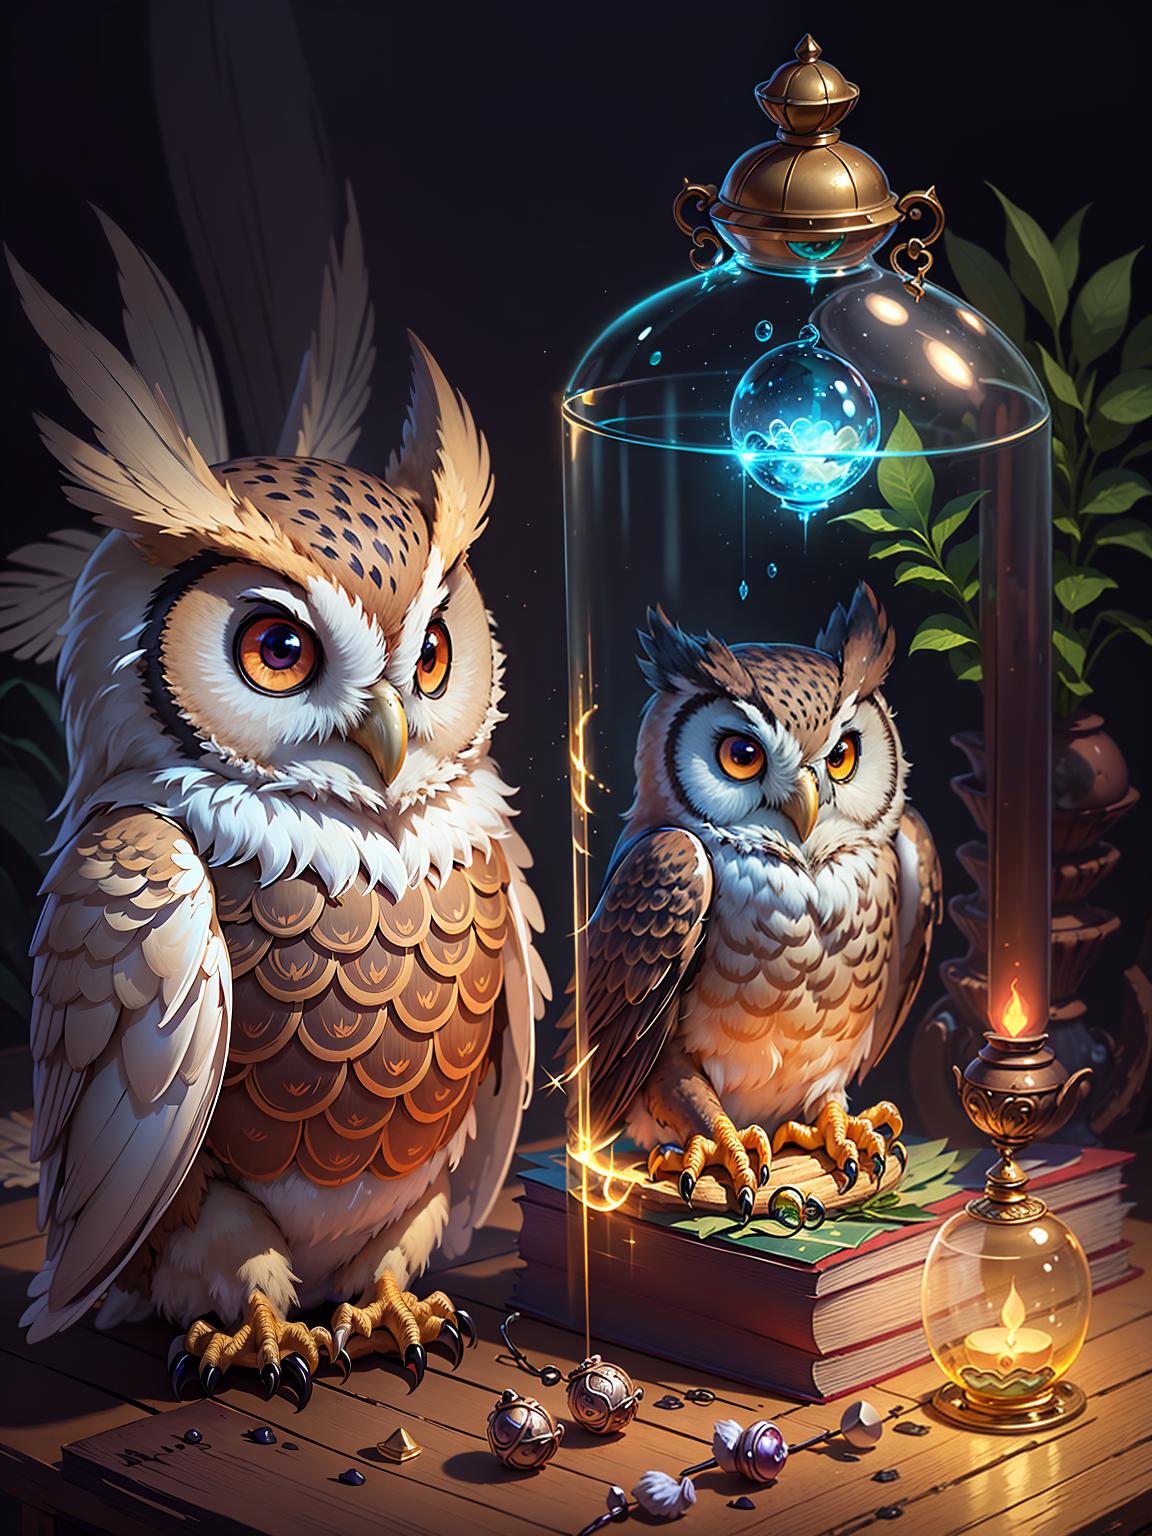  master piece, best quality, ultra detailed, highres, 4k.8k, Wise owl with a sandglass., Controlling the flow of time, manipulating past and future., Wise and mysterious., BREAK Time controlling owl with a sandglass., Enchanted forest clearing., Sandglass, old scrolls, and mystical symbols., BREAK Mystical and tranquil., Glowing and shimmering effects around the owl and sandglass., fun00d